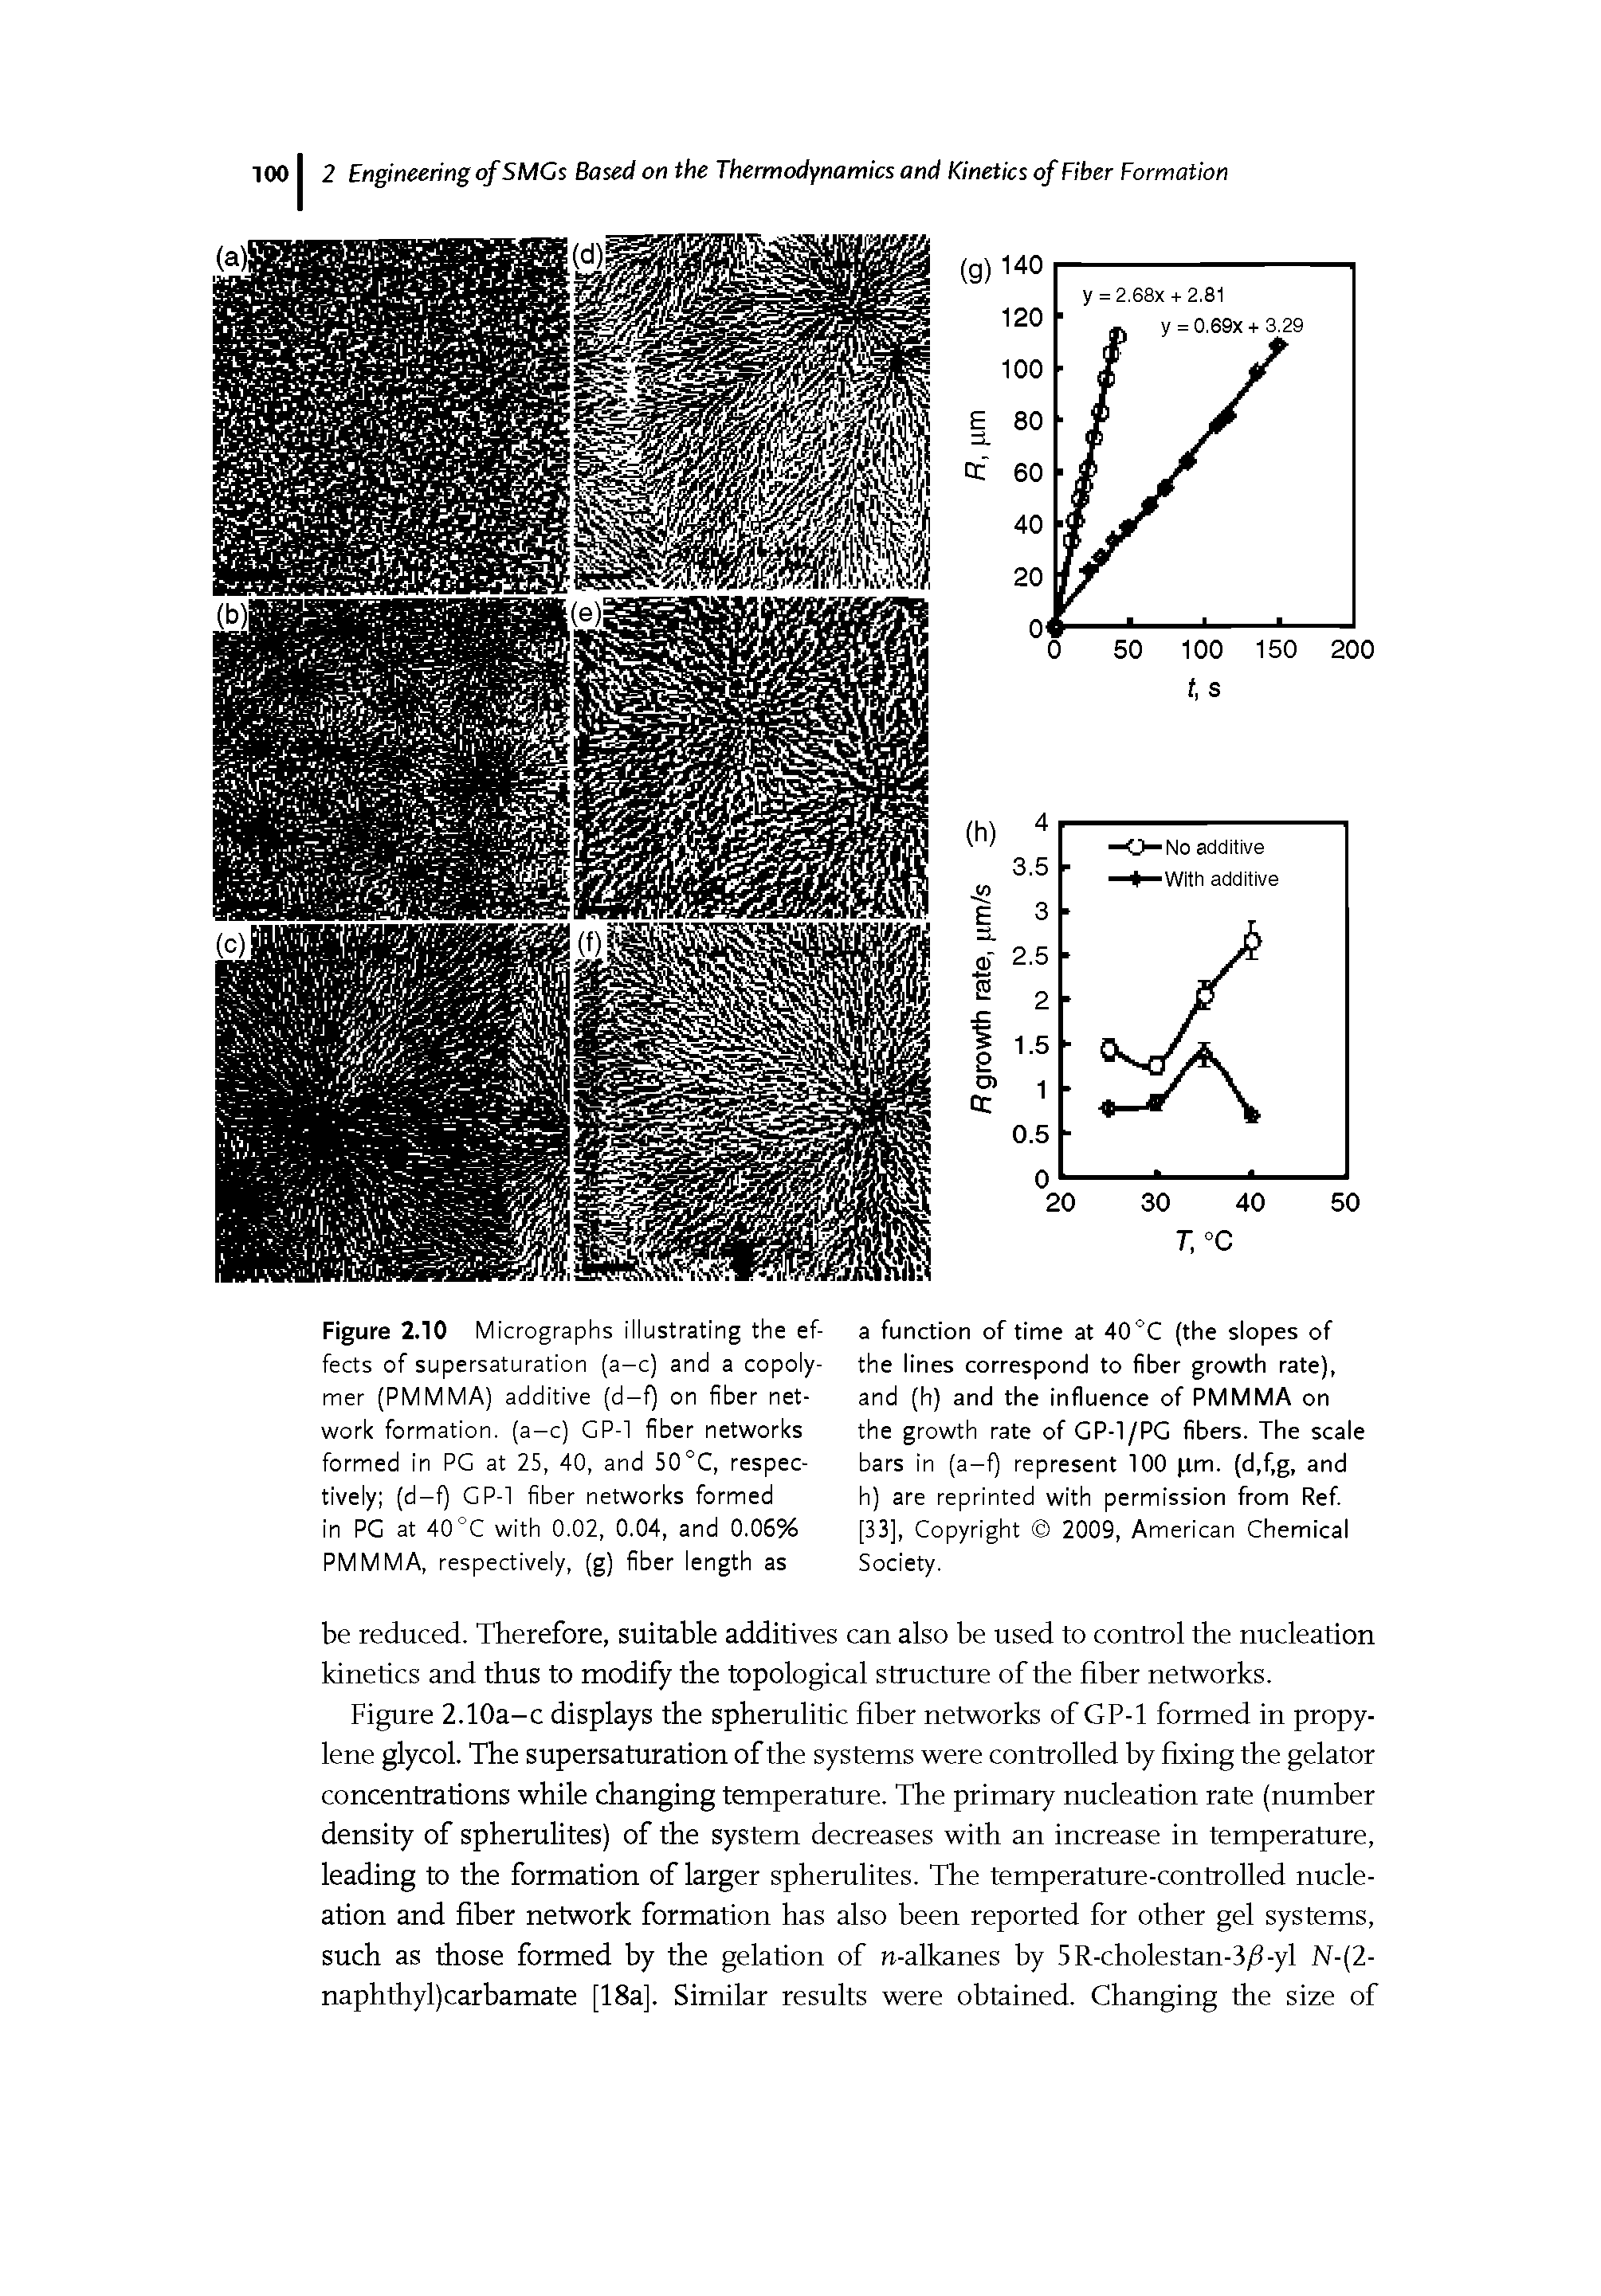 Figure 2.10 Micrographs illustrating the effects of supersaturation (a—c) and a copolymer (PMMMA) additive (d-f) on fiber network formation, (a-c) GP-1 fiber networks formed in PC at 25, 40, and 50°C, respectively (d-f) GP-1 fiber networks formed in PC at 40 °C with 0.02, 0.04, and 0.06% PMMMA, respectively, (g) fiber length as...